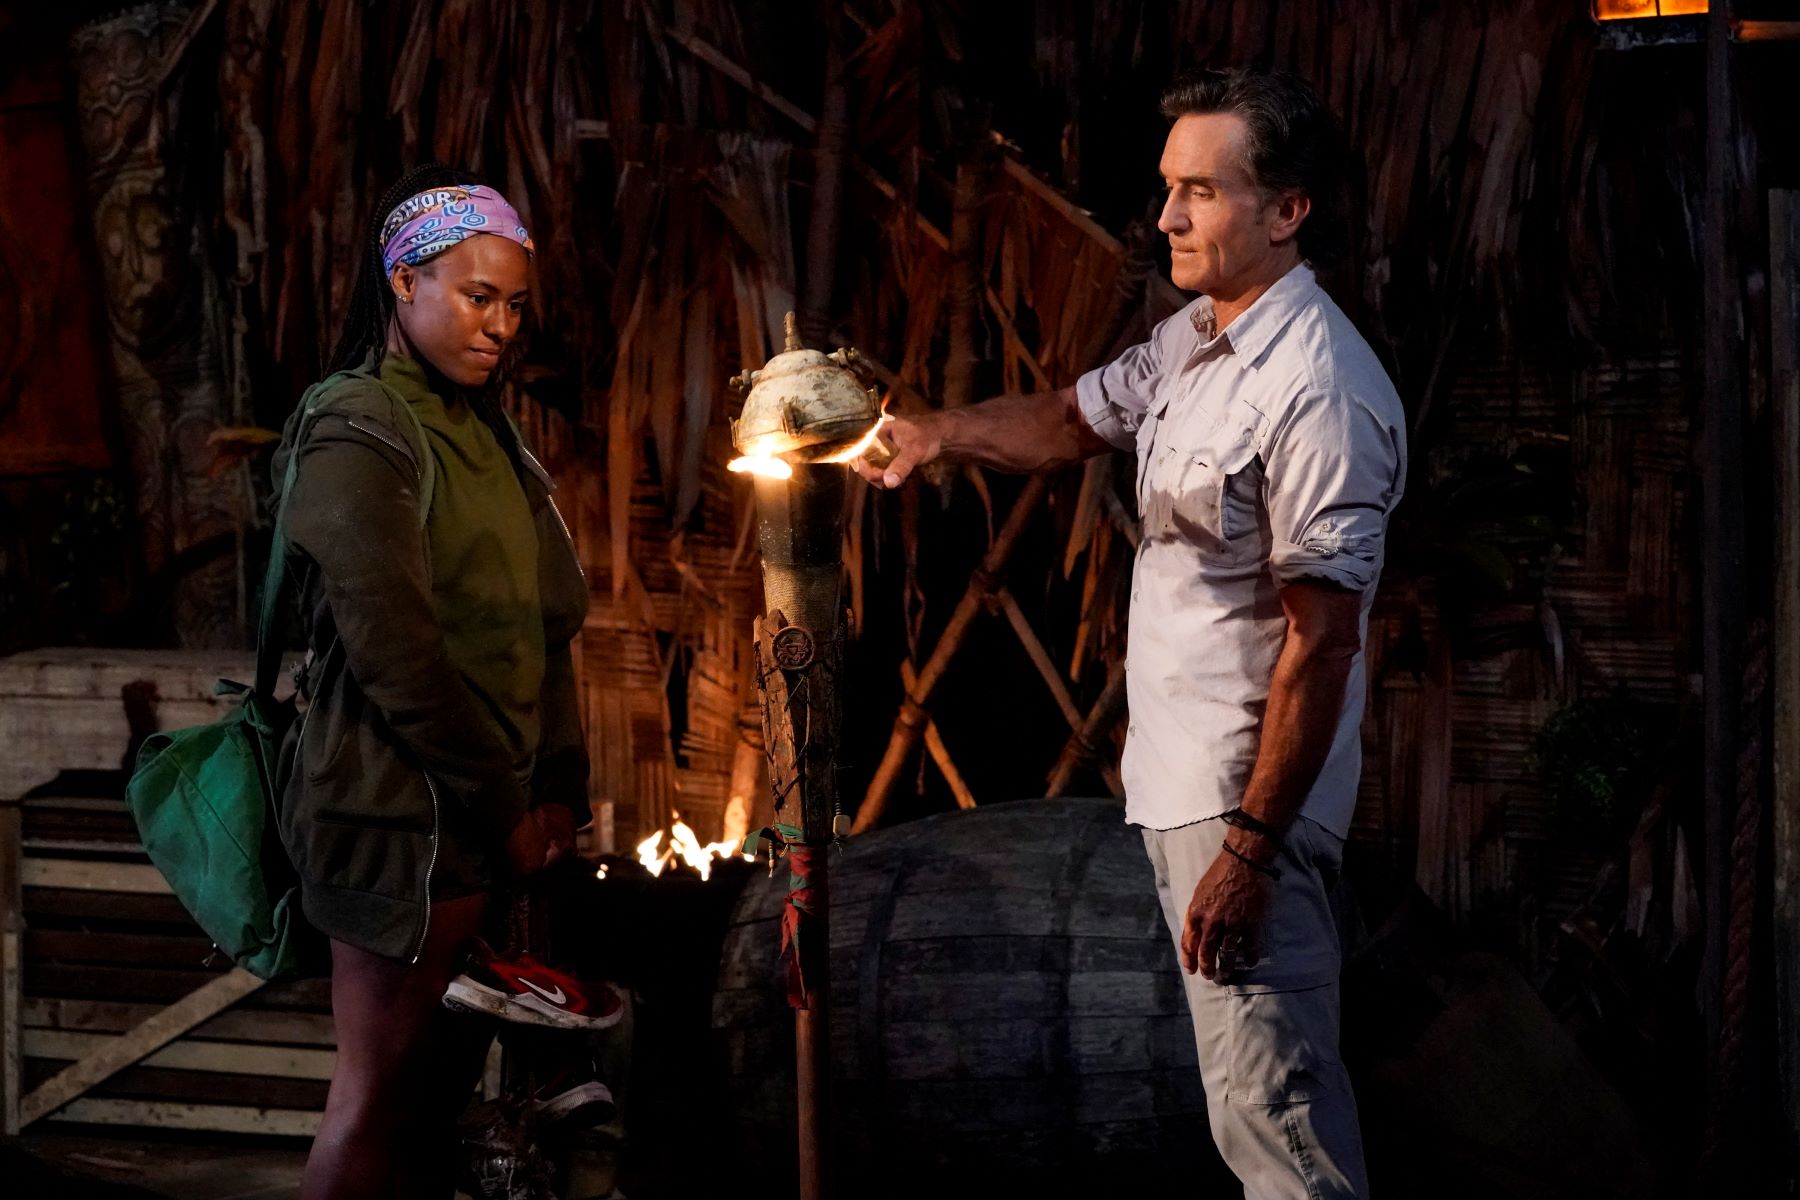 Chanelle Howell and Jeff Probst